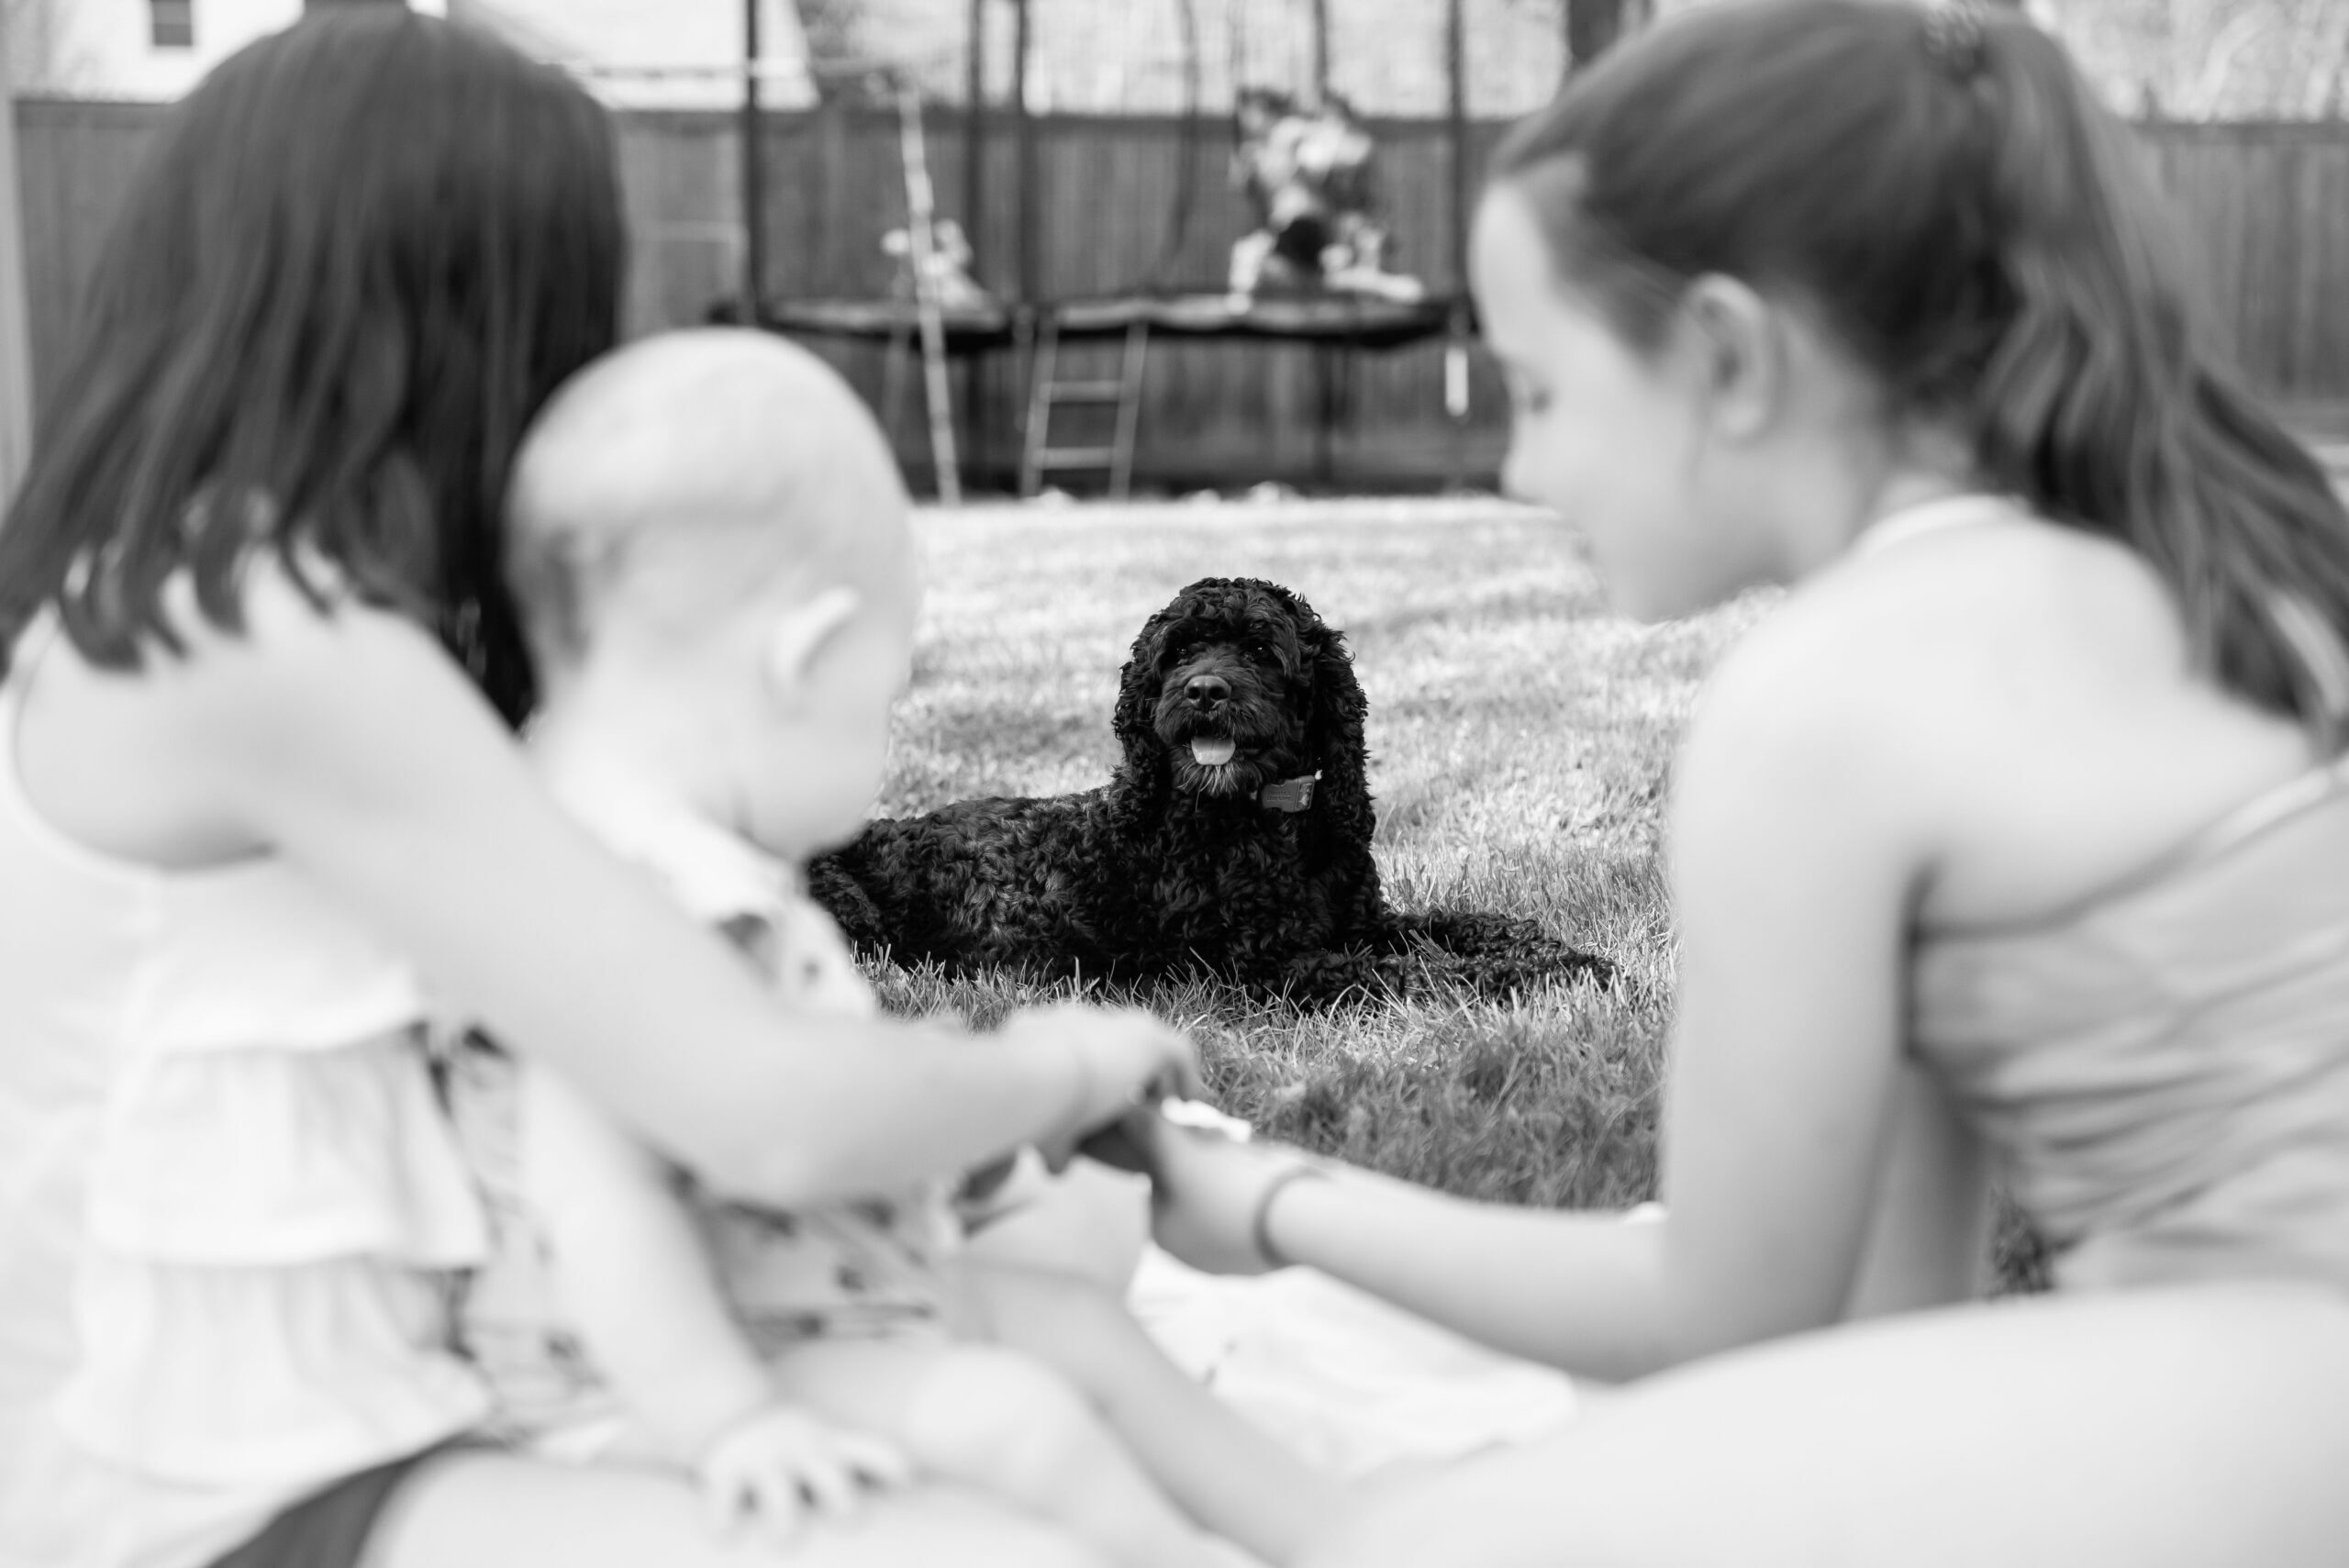 Black and white outdoor image of a black cockapoo laying the grass. There is an out of focus scene in the foreground of two girls playing with a baby and boys on a trampoline off in the distance. The dog is in the middle relaxing.